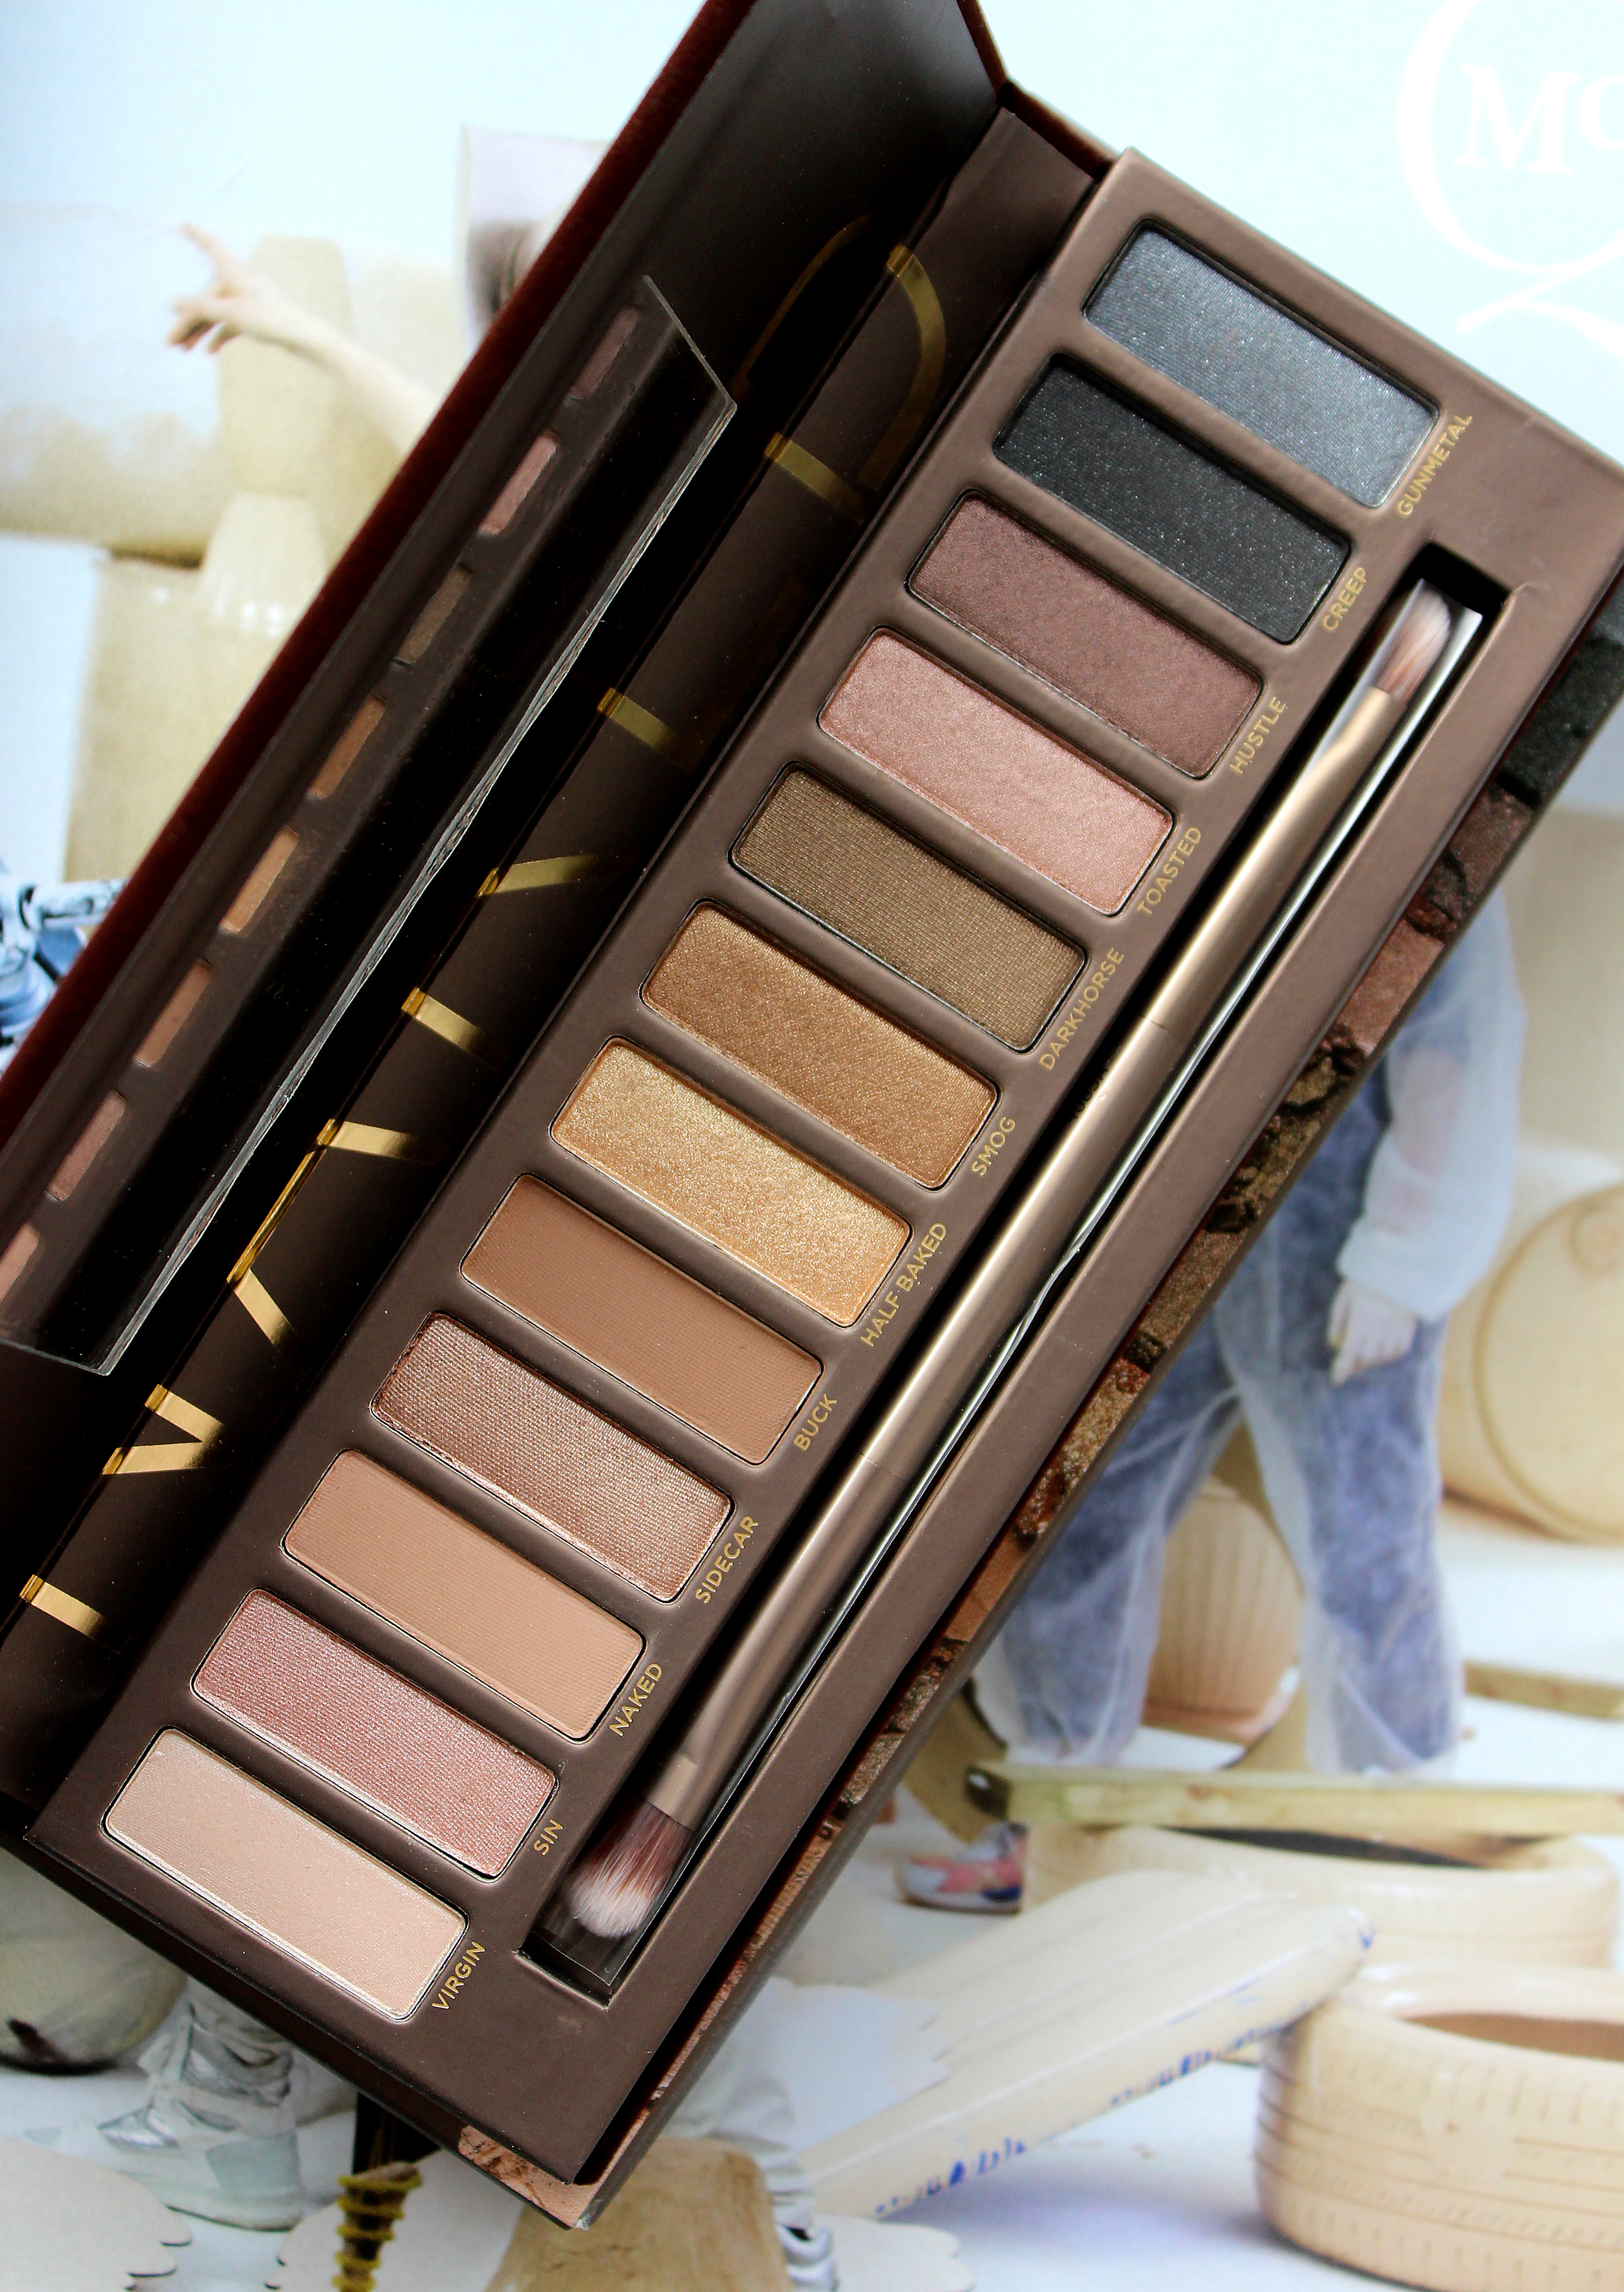 A New Urban Decay Naked Palette Is Coming!